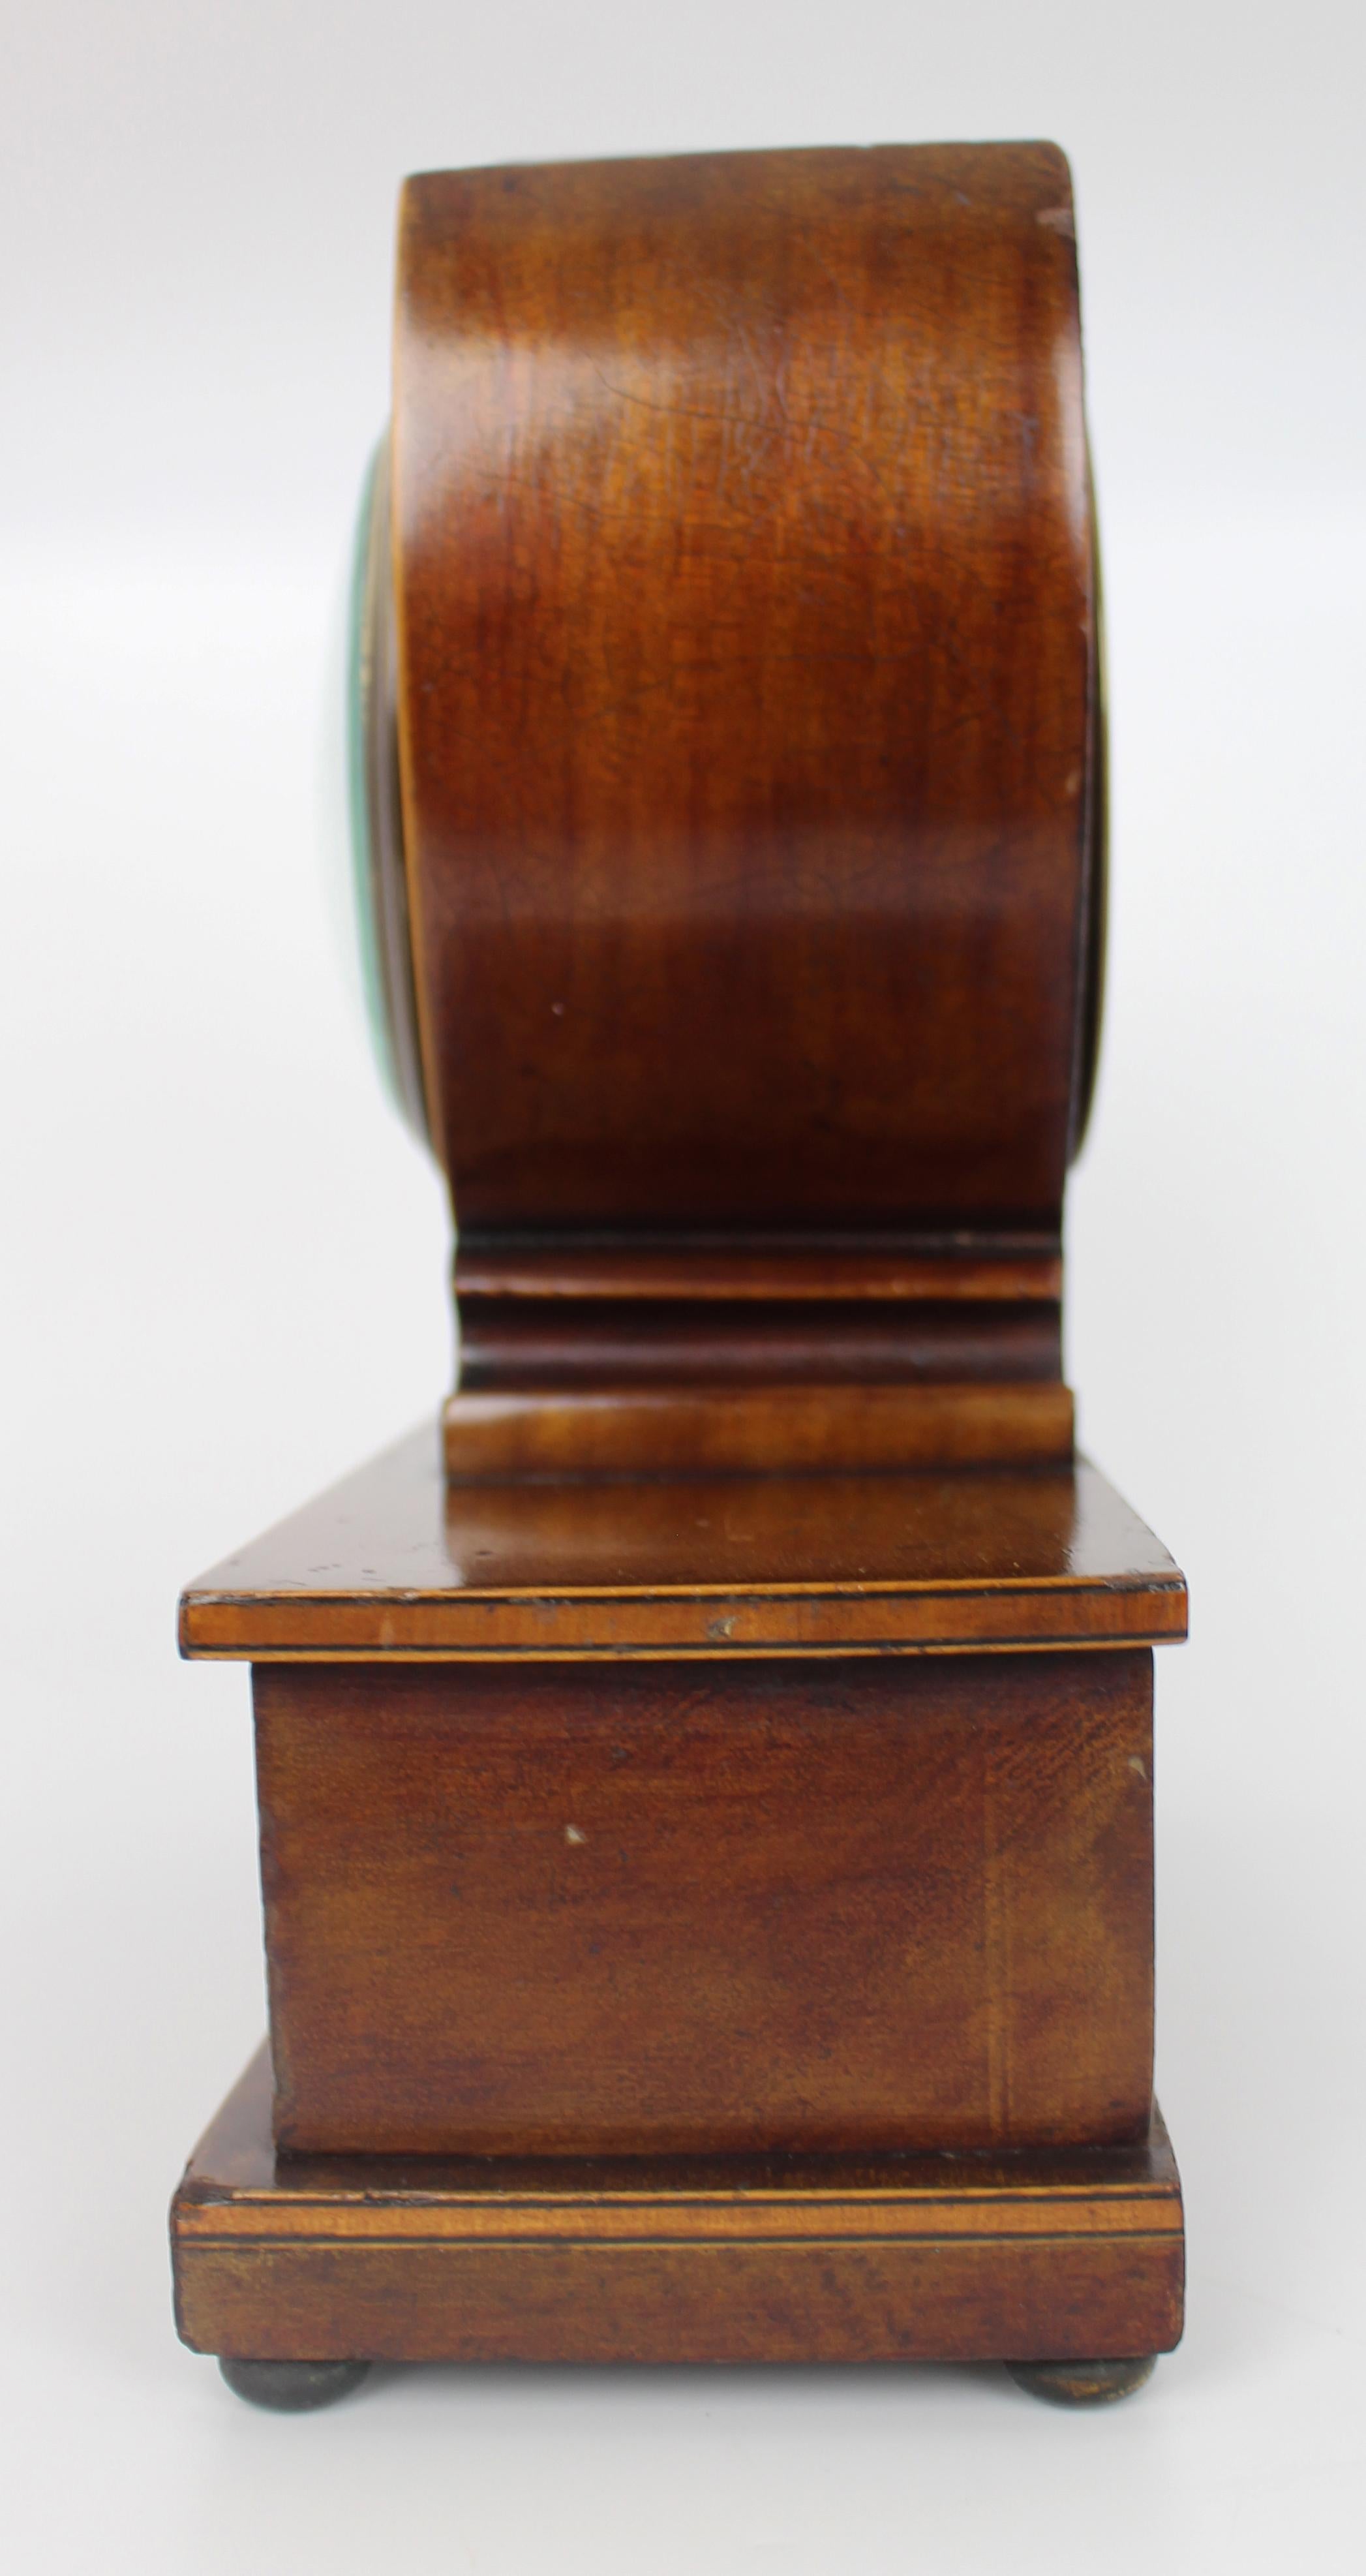 20th Century Elegant Inlaid Mahogany Mantle Clock by Wray, Son & Perry c.1900 For Sale